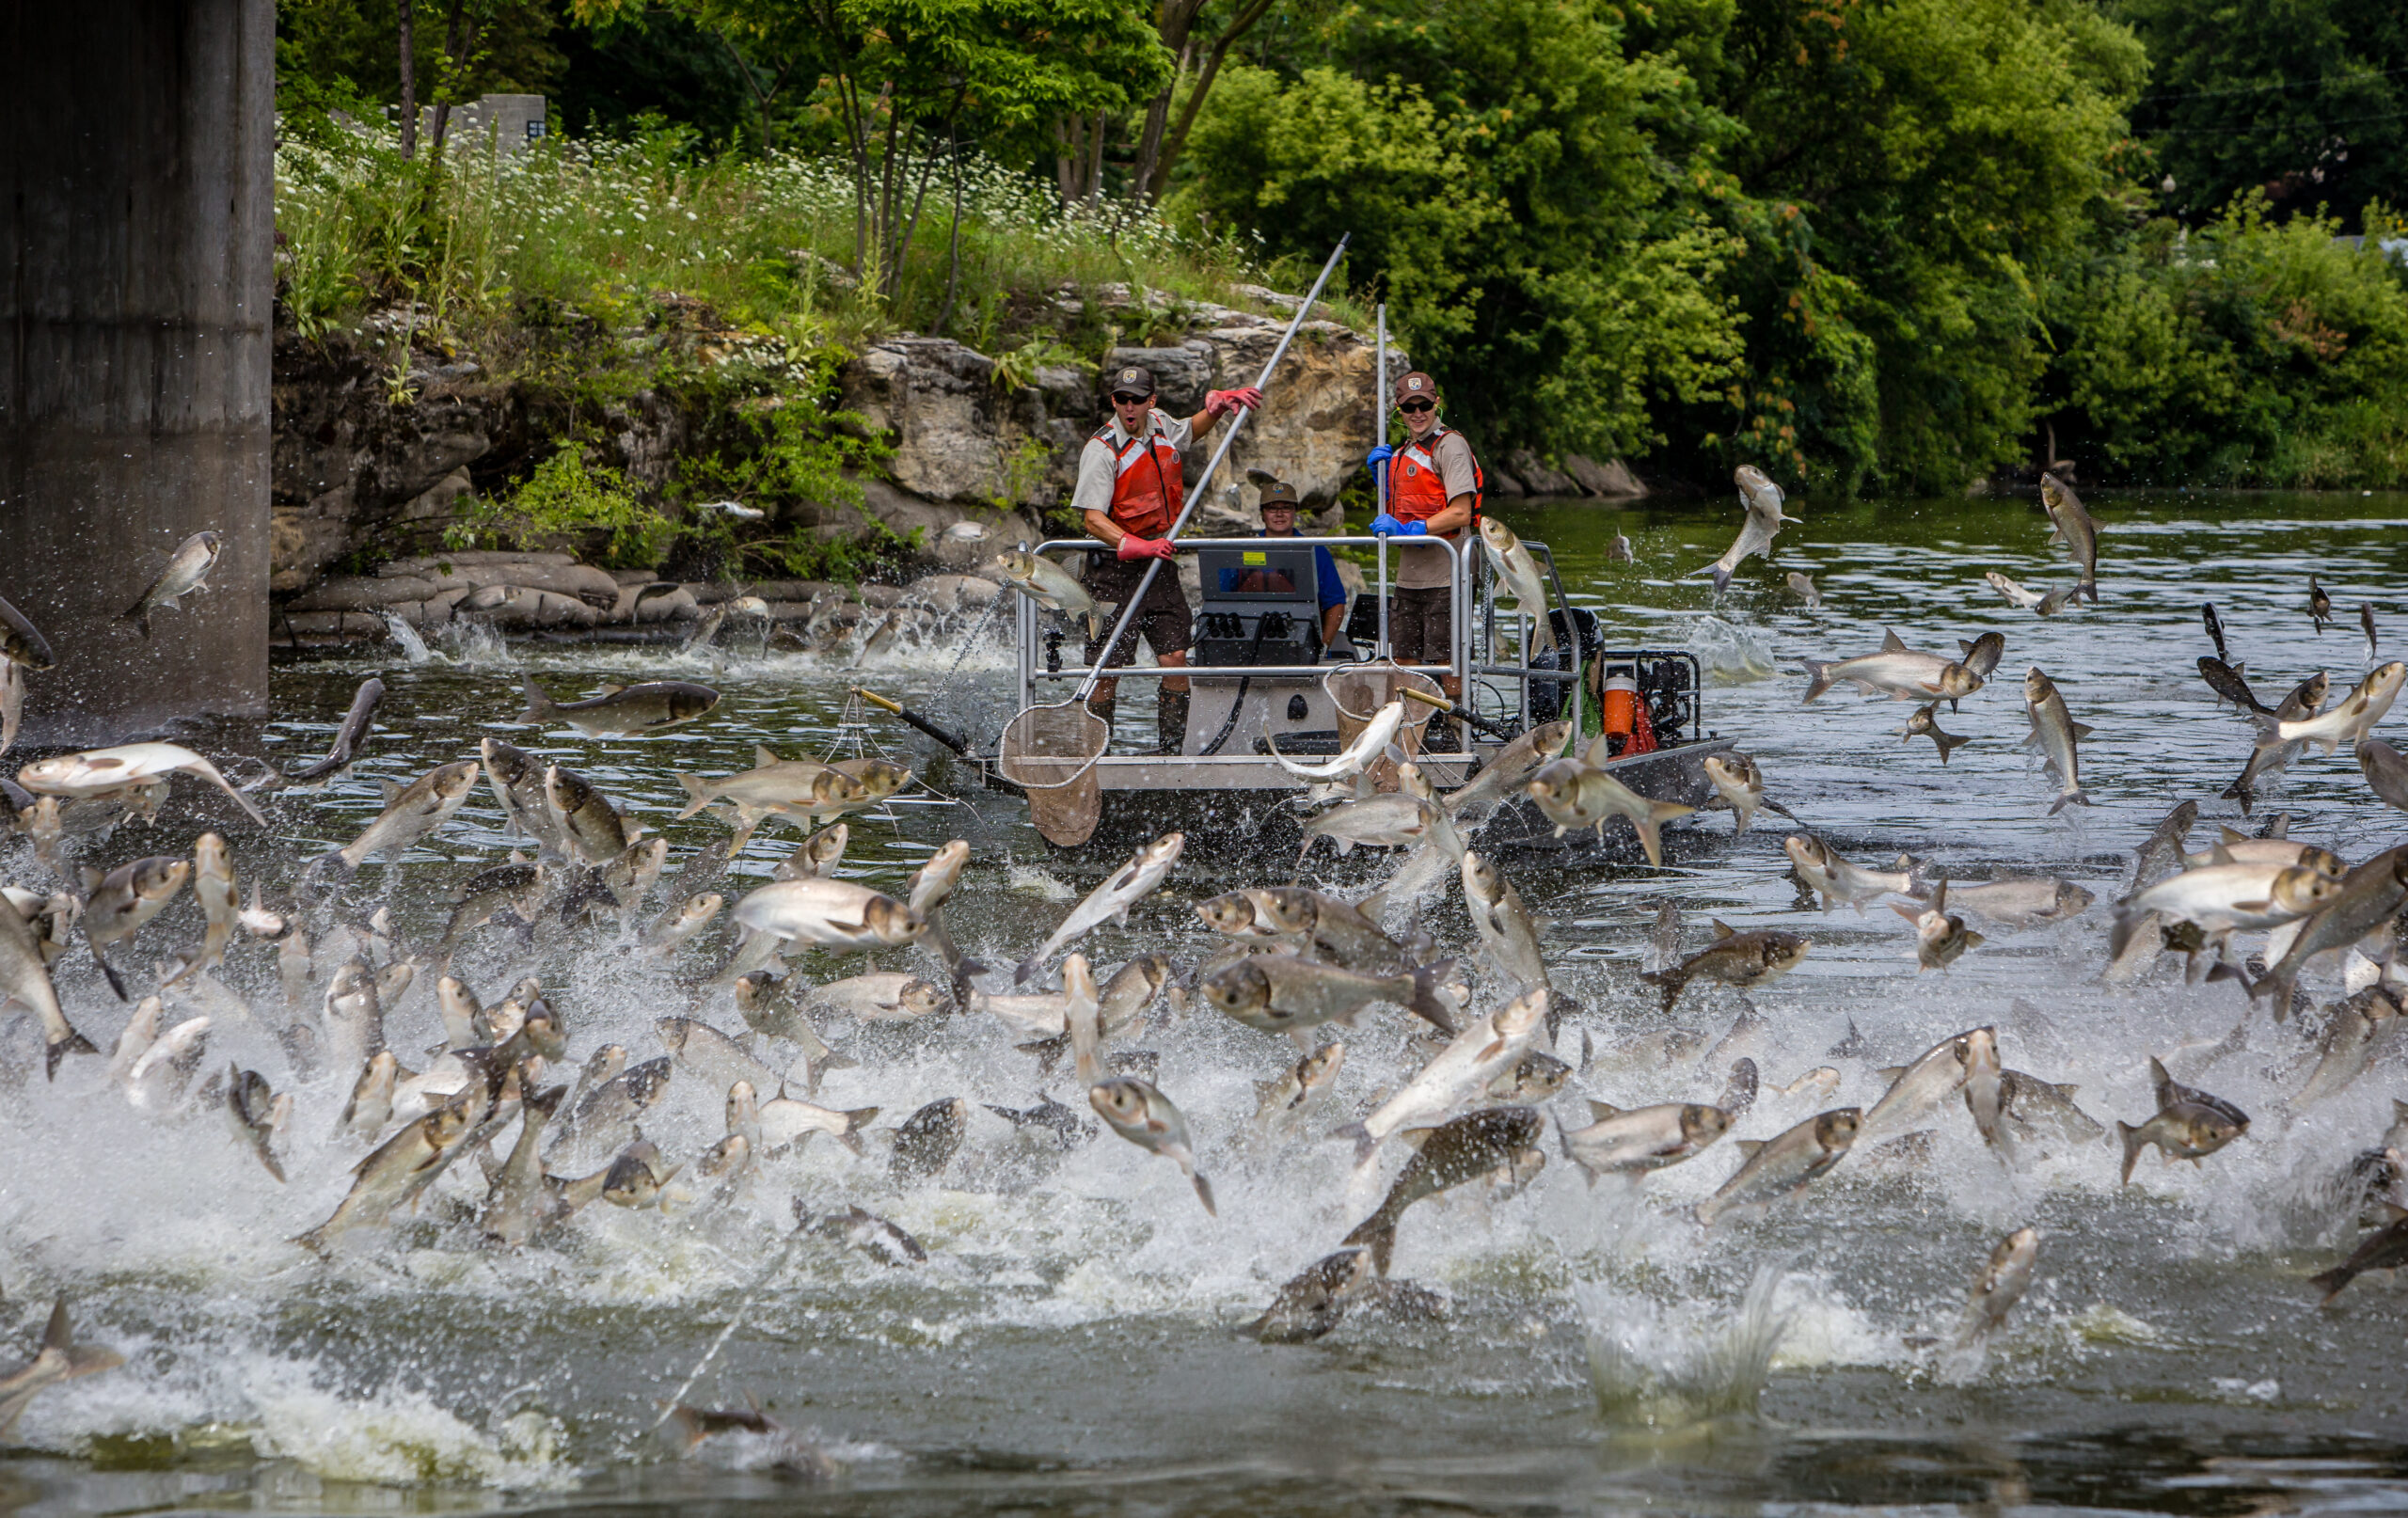 A fish dealer was convicted of selling invasive carp illegally.